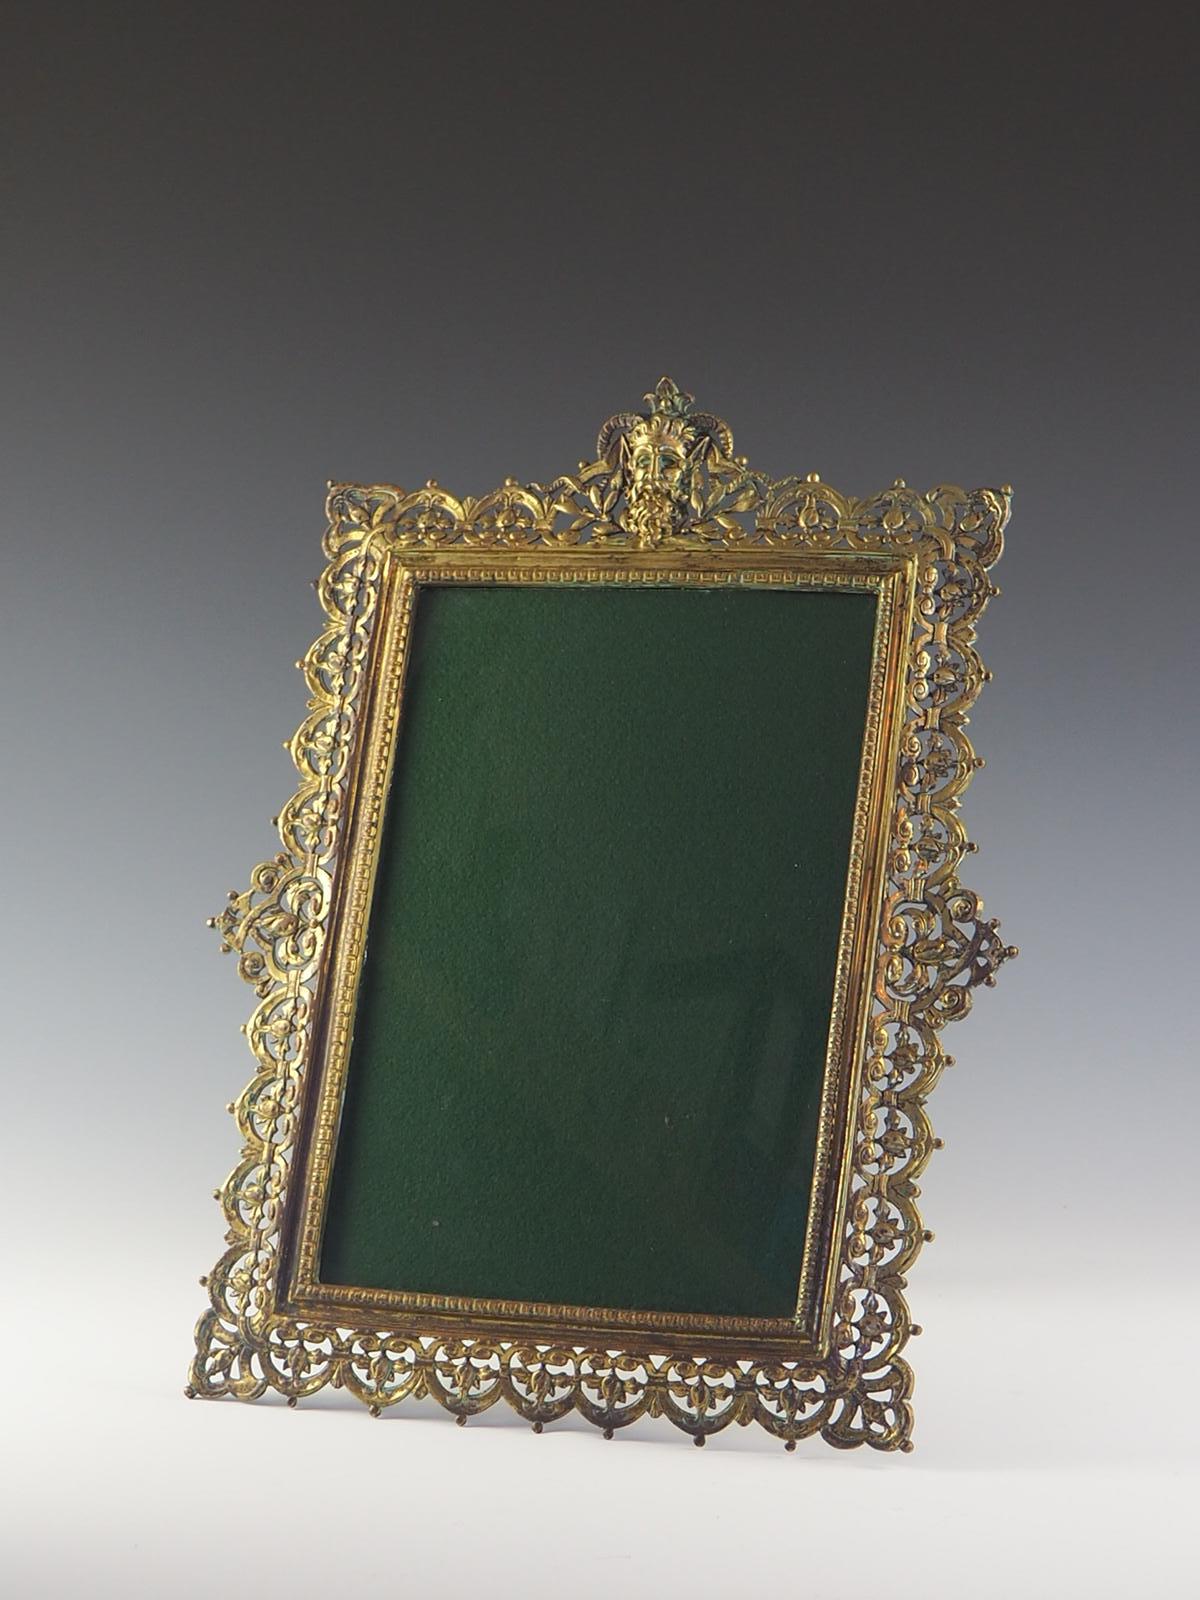 Large Antique Ornate Brass Photo Frame with Greek God Pan . Super Heavy, good quality and really beautiful.

The frame accepts a photo / picture size of c. 11